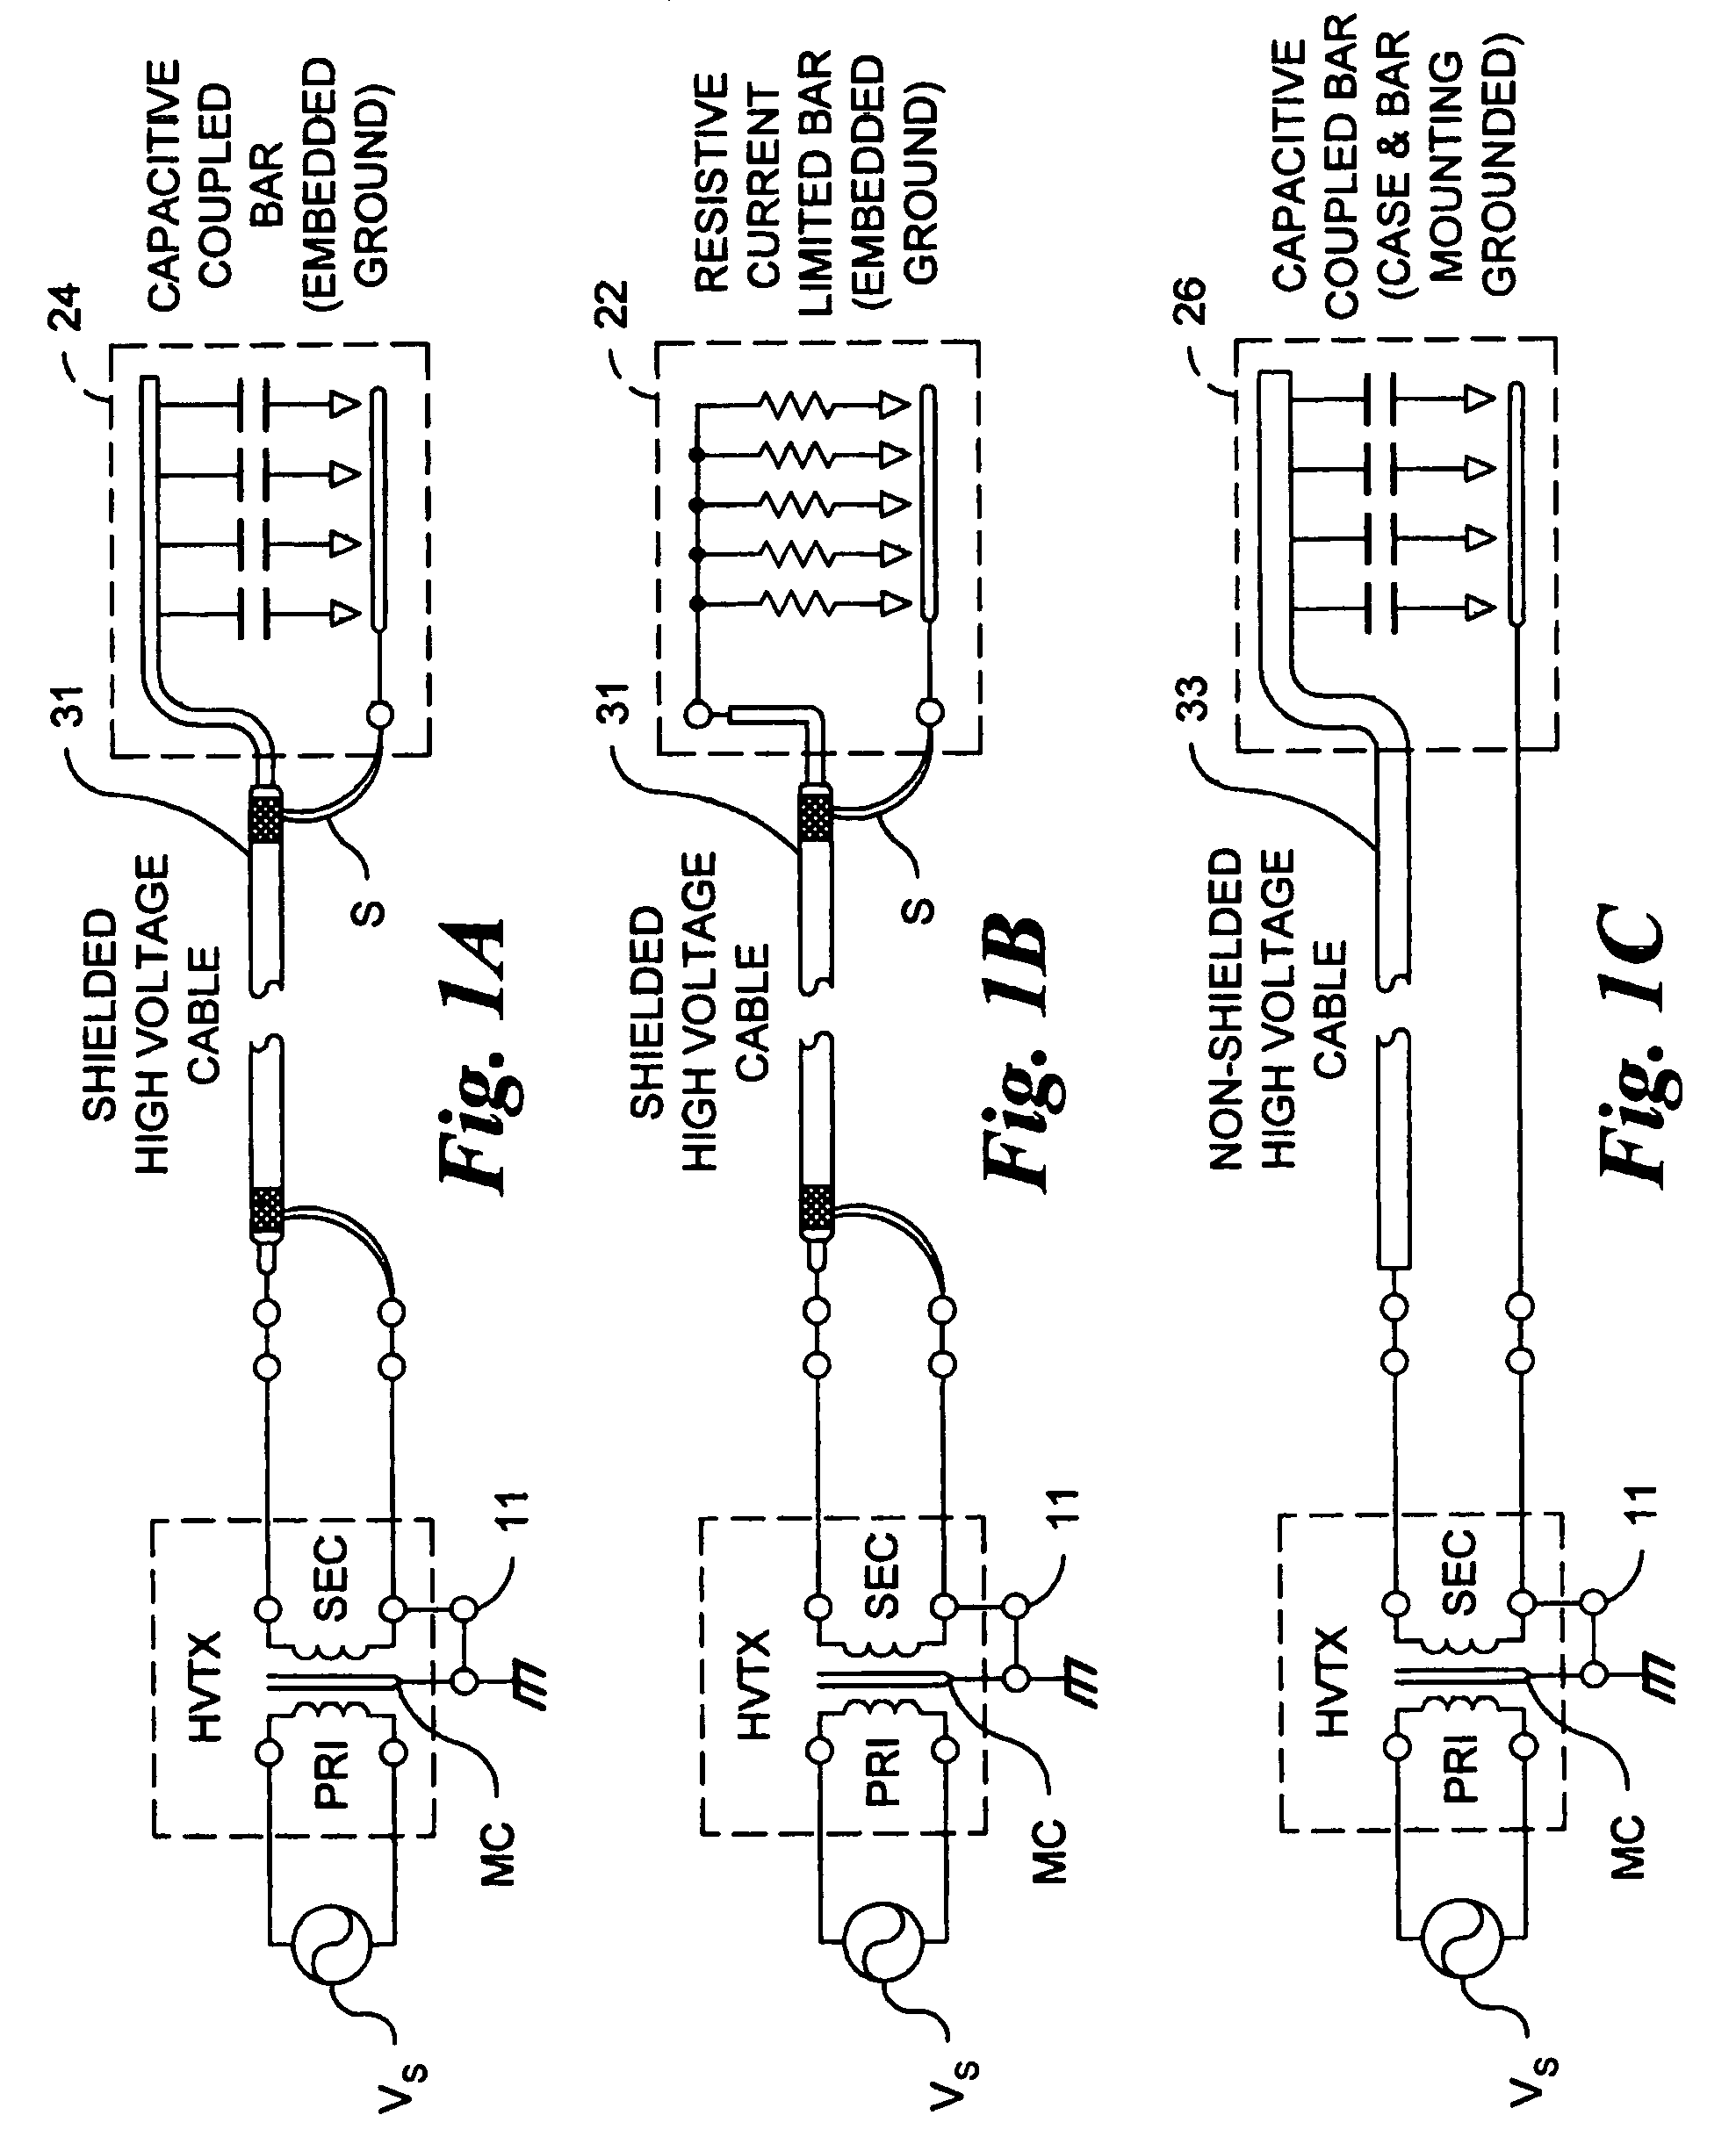 Alternating current monitor for an ionizer power supply